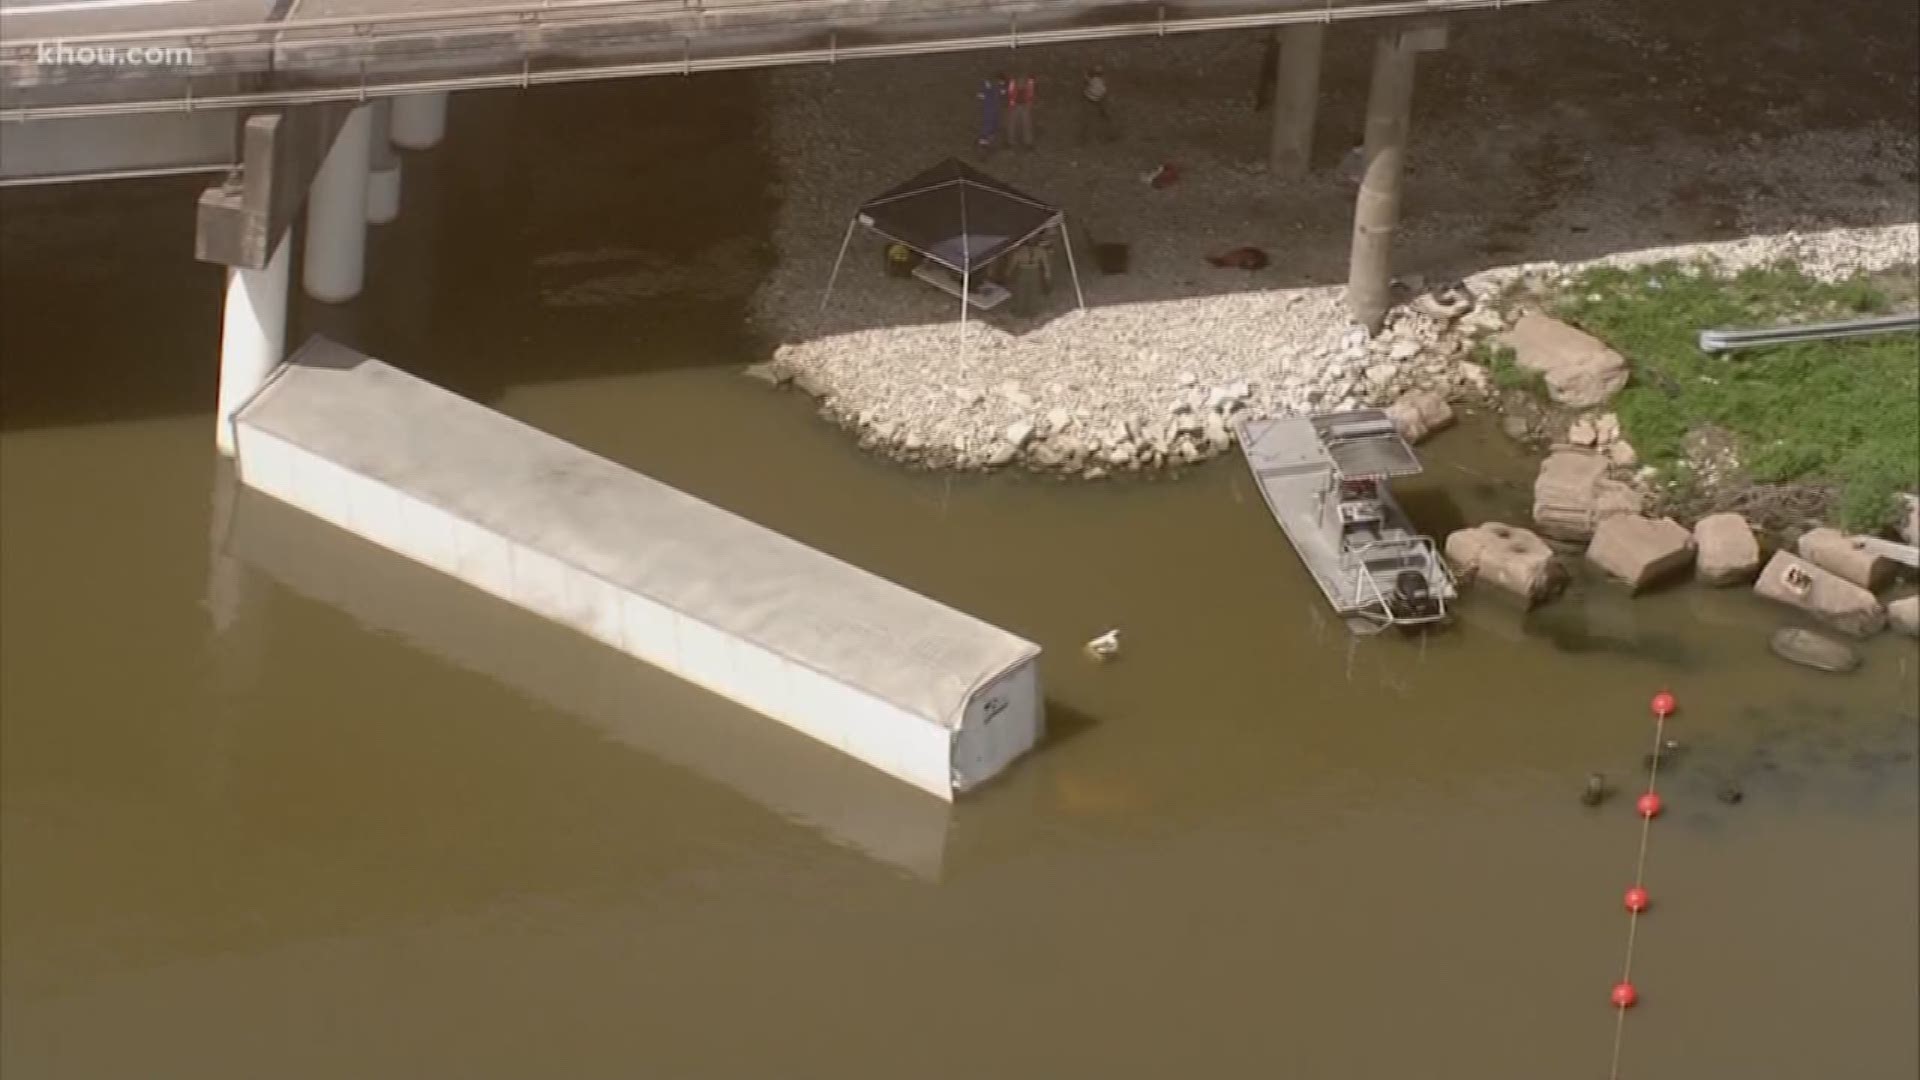 A man whose body was recovered from the cab of a big rig that crashed into the San Jacinto River has been identified, according to Sheriff Ed Gonzalez.